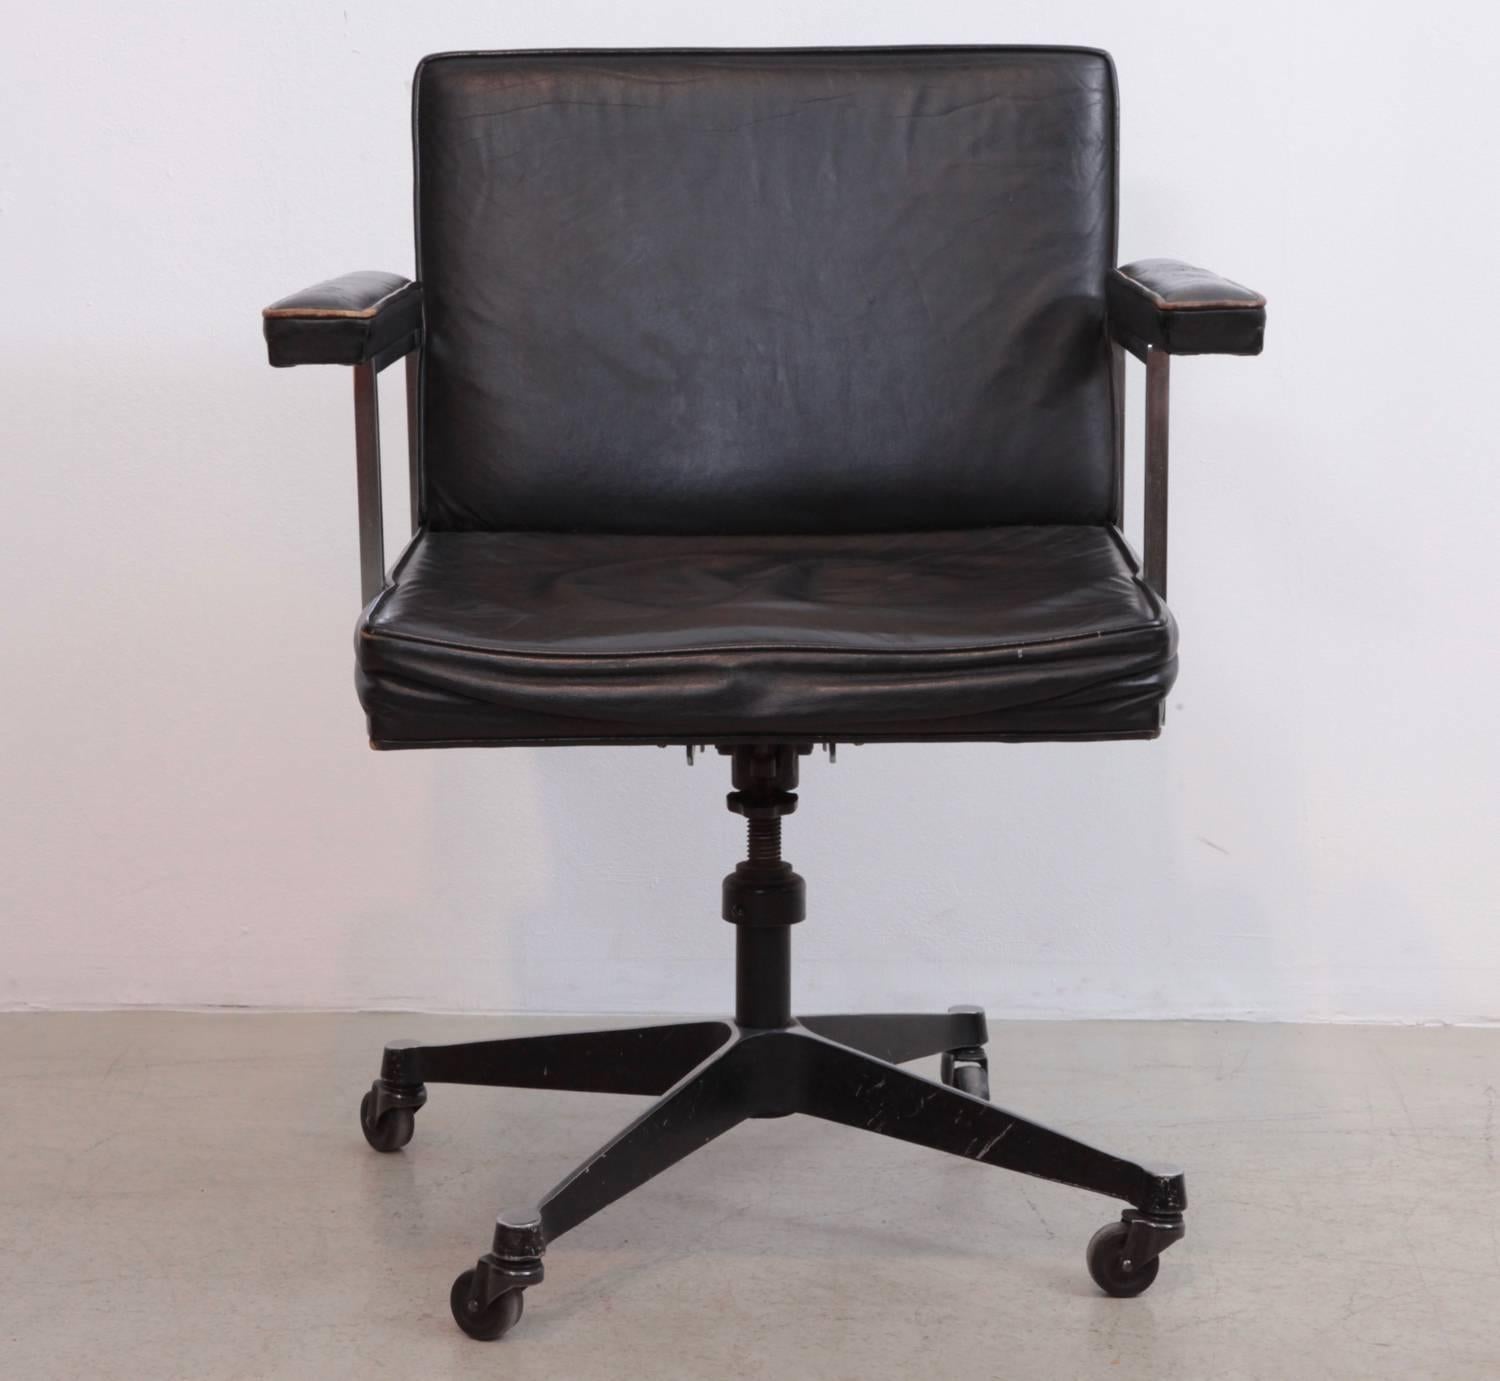 American Classical Rare Desk Chair No. 5770 by George Nelson for Herman Miller, 1957